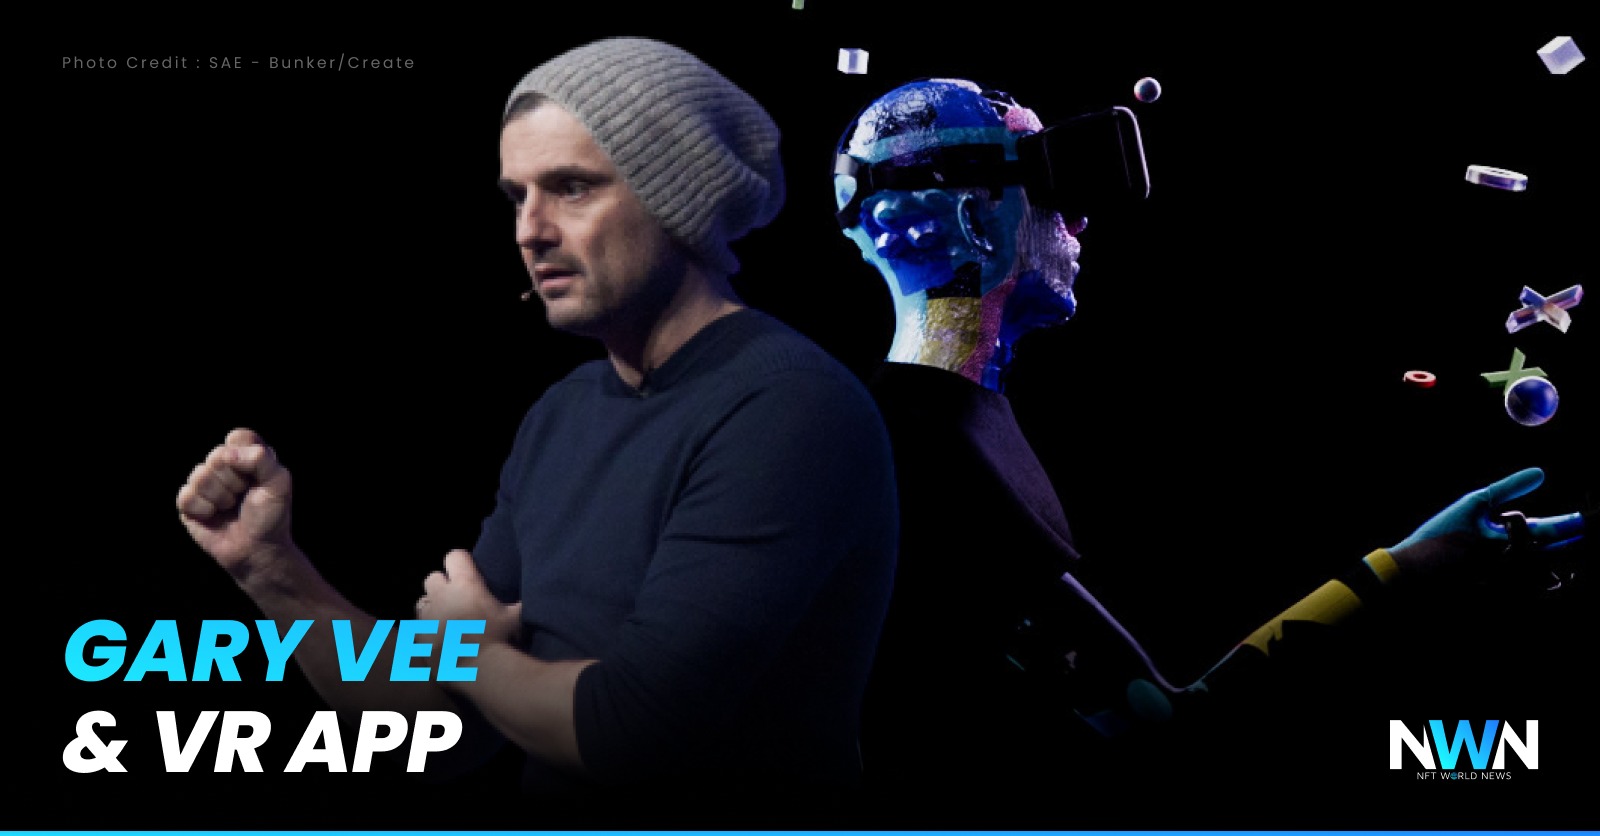 Gary Vee Digging in NFTs, VR and More